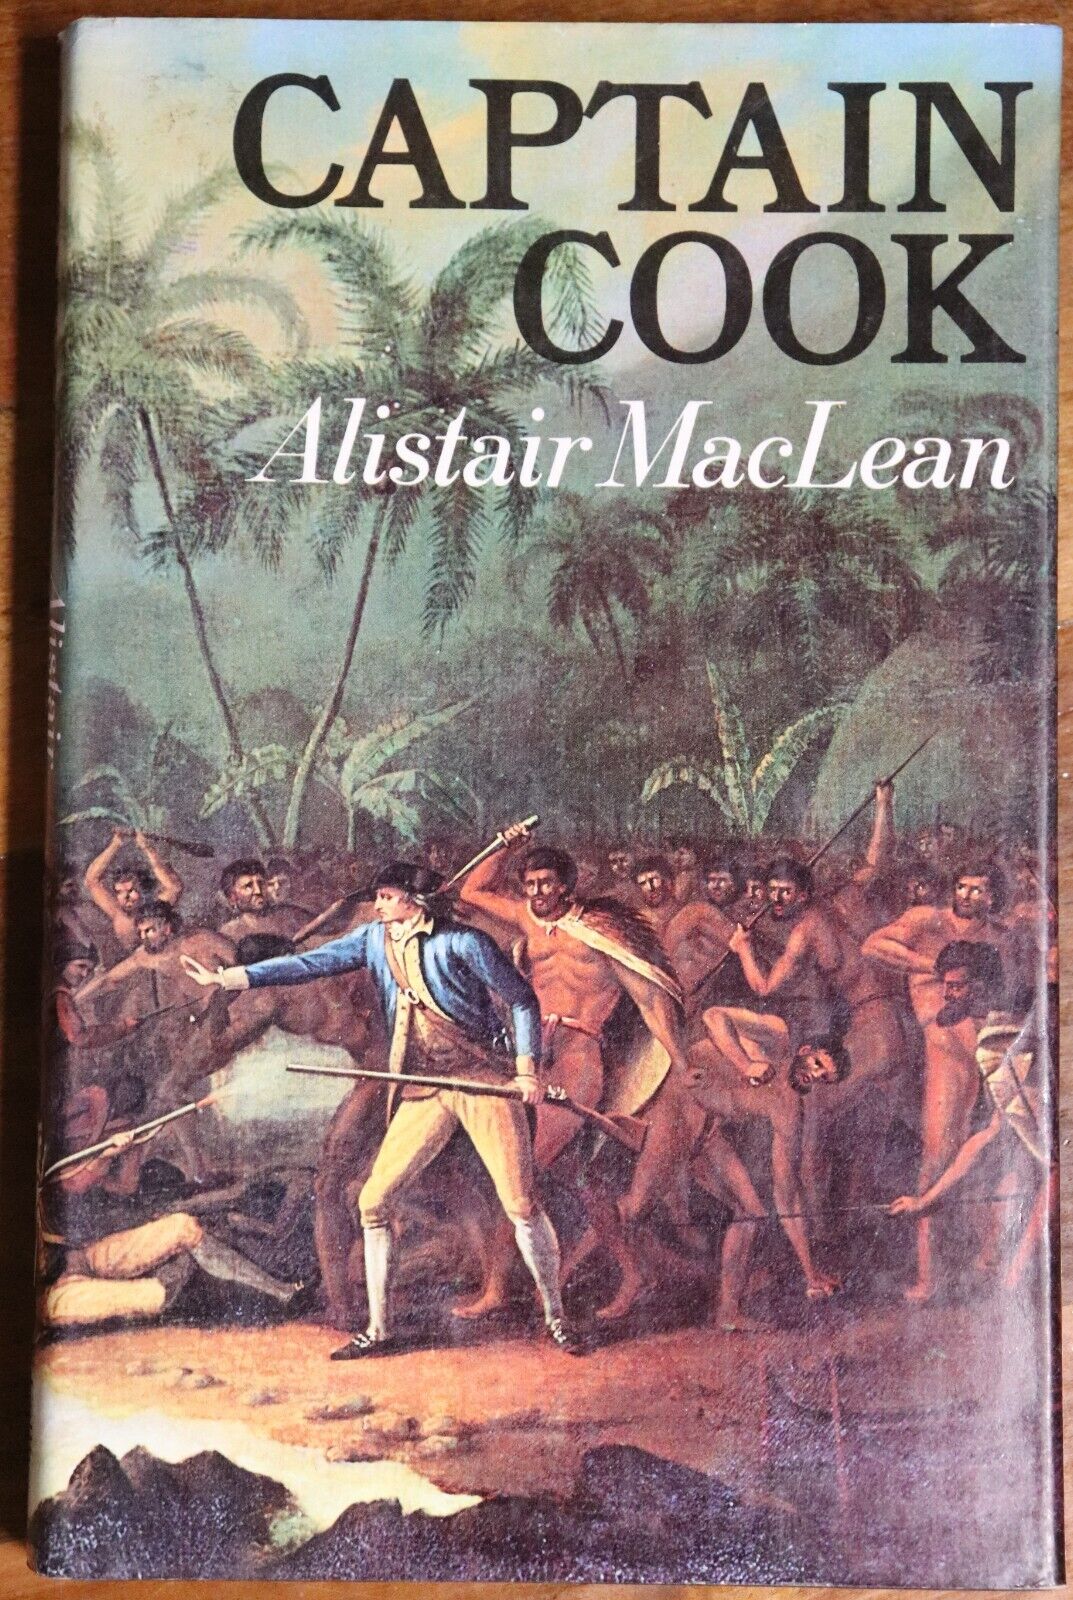 Captain Cook by Alistair MacLean - 1972 - Australian Discovery History Book